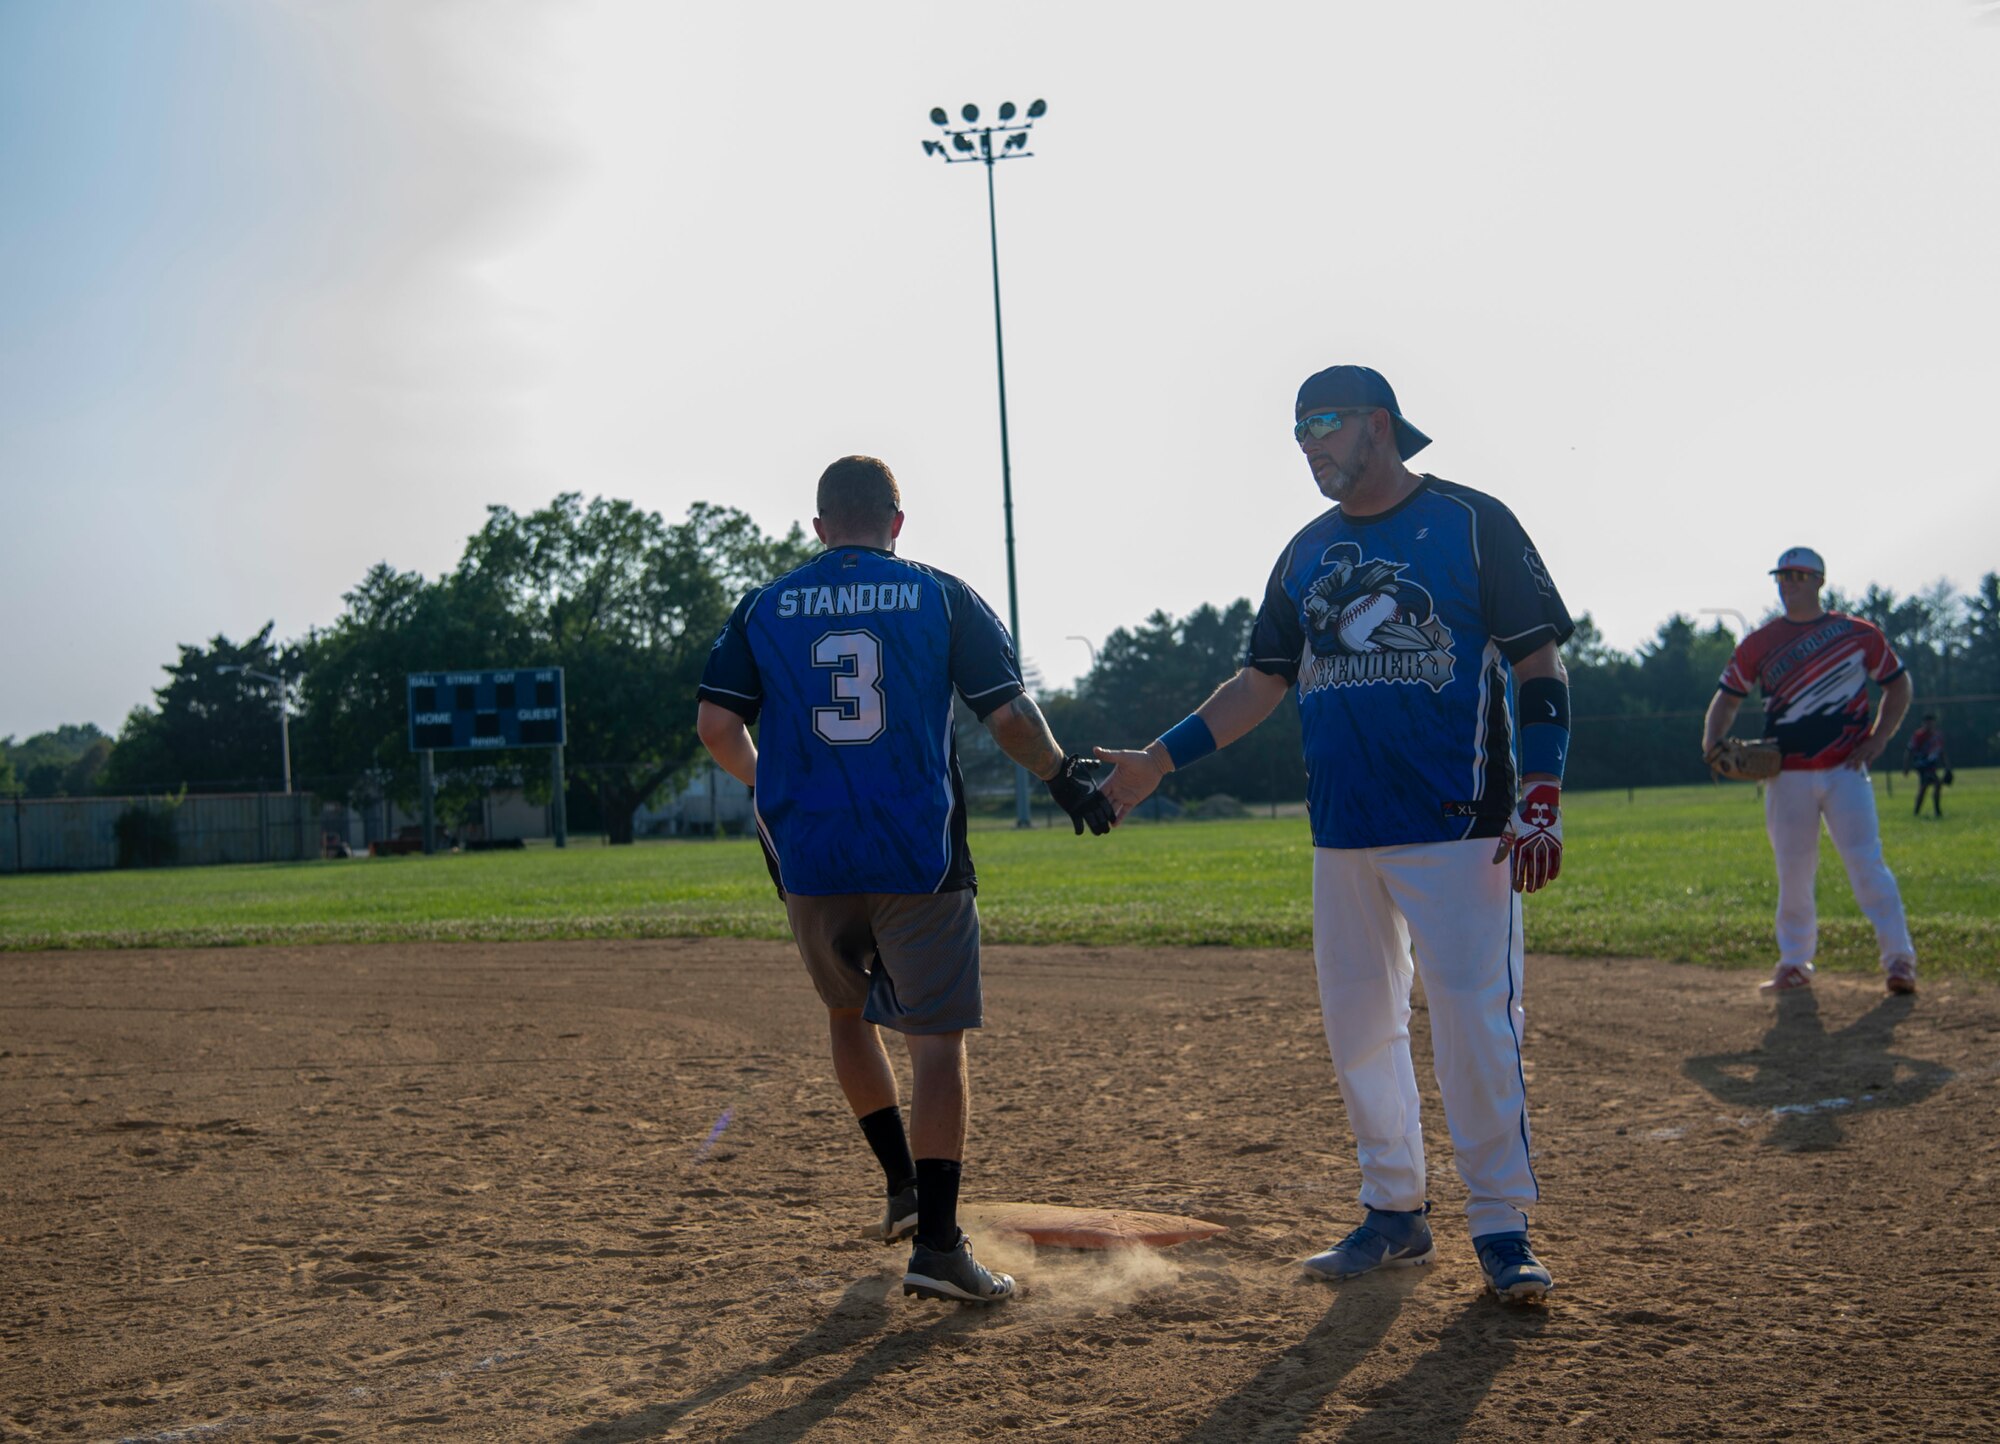 Richard Barker, right, 436th Security Forces Squadron security specialist, high fives Senior Airman Nicholas Standon, 436th SFS response force member, after reaching first base during an intramural softball game against the 436th Maintenance Squadron Isochronal Maintenance Dock on Dover Air Force Base, Delaware, July 26, 2021. The 436th SFS won the game 13-4. (U.S. Air Force photo by Tech. Sgt. Nicole Leidholm)